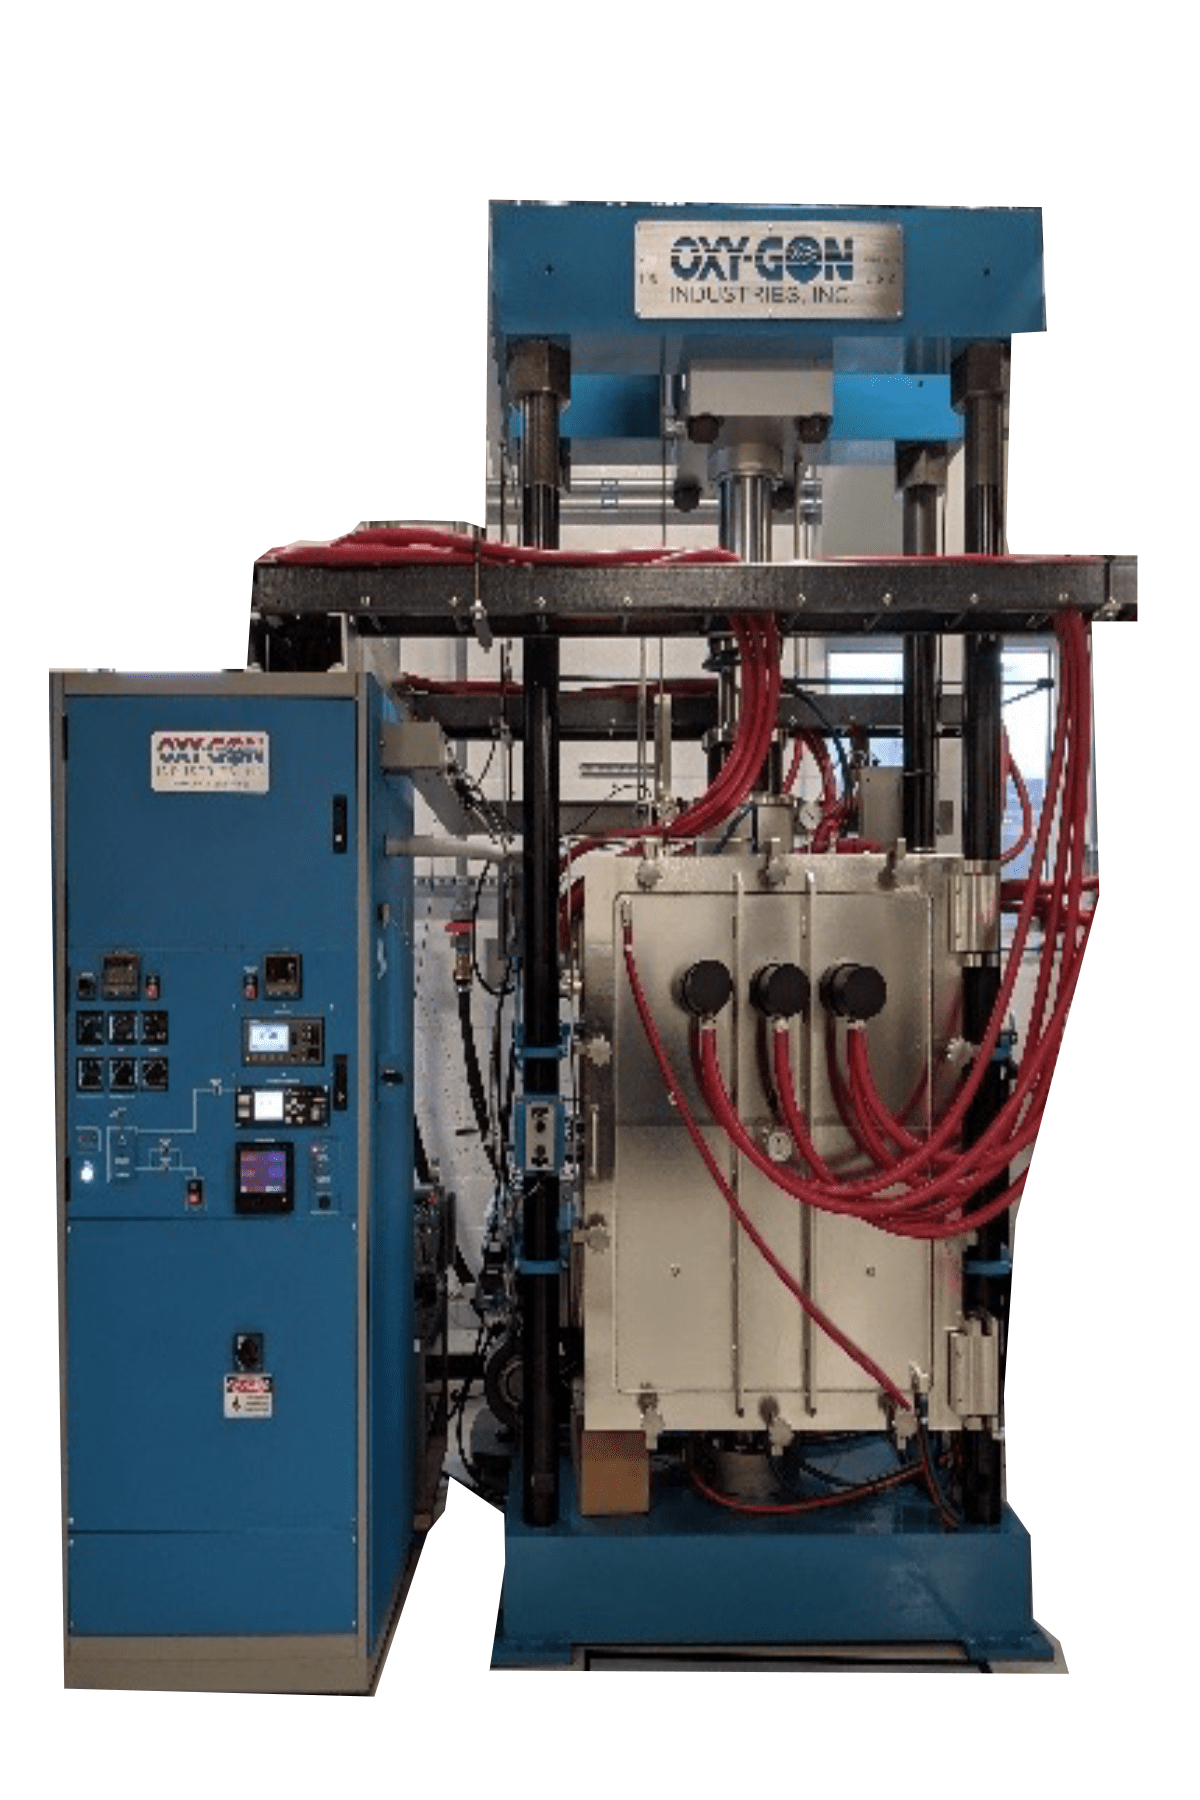 Hot Press Furnace Systems - Oxy-Gon Industries Inc.